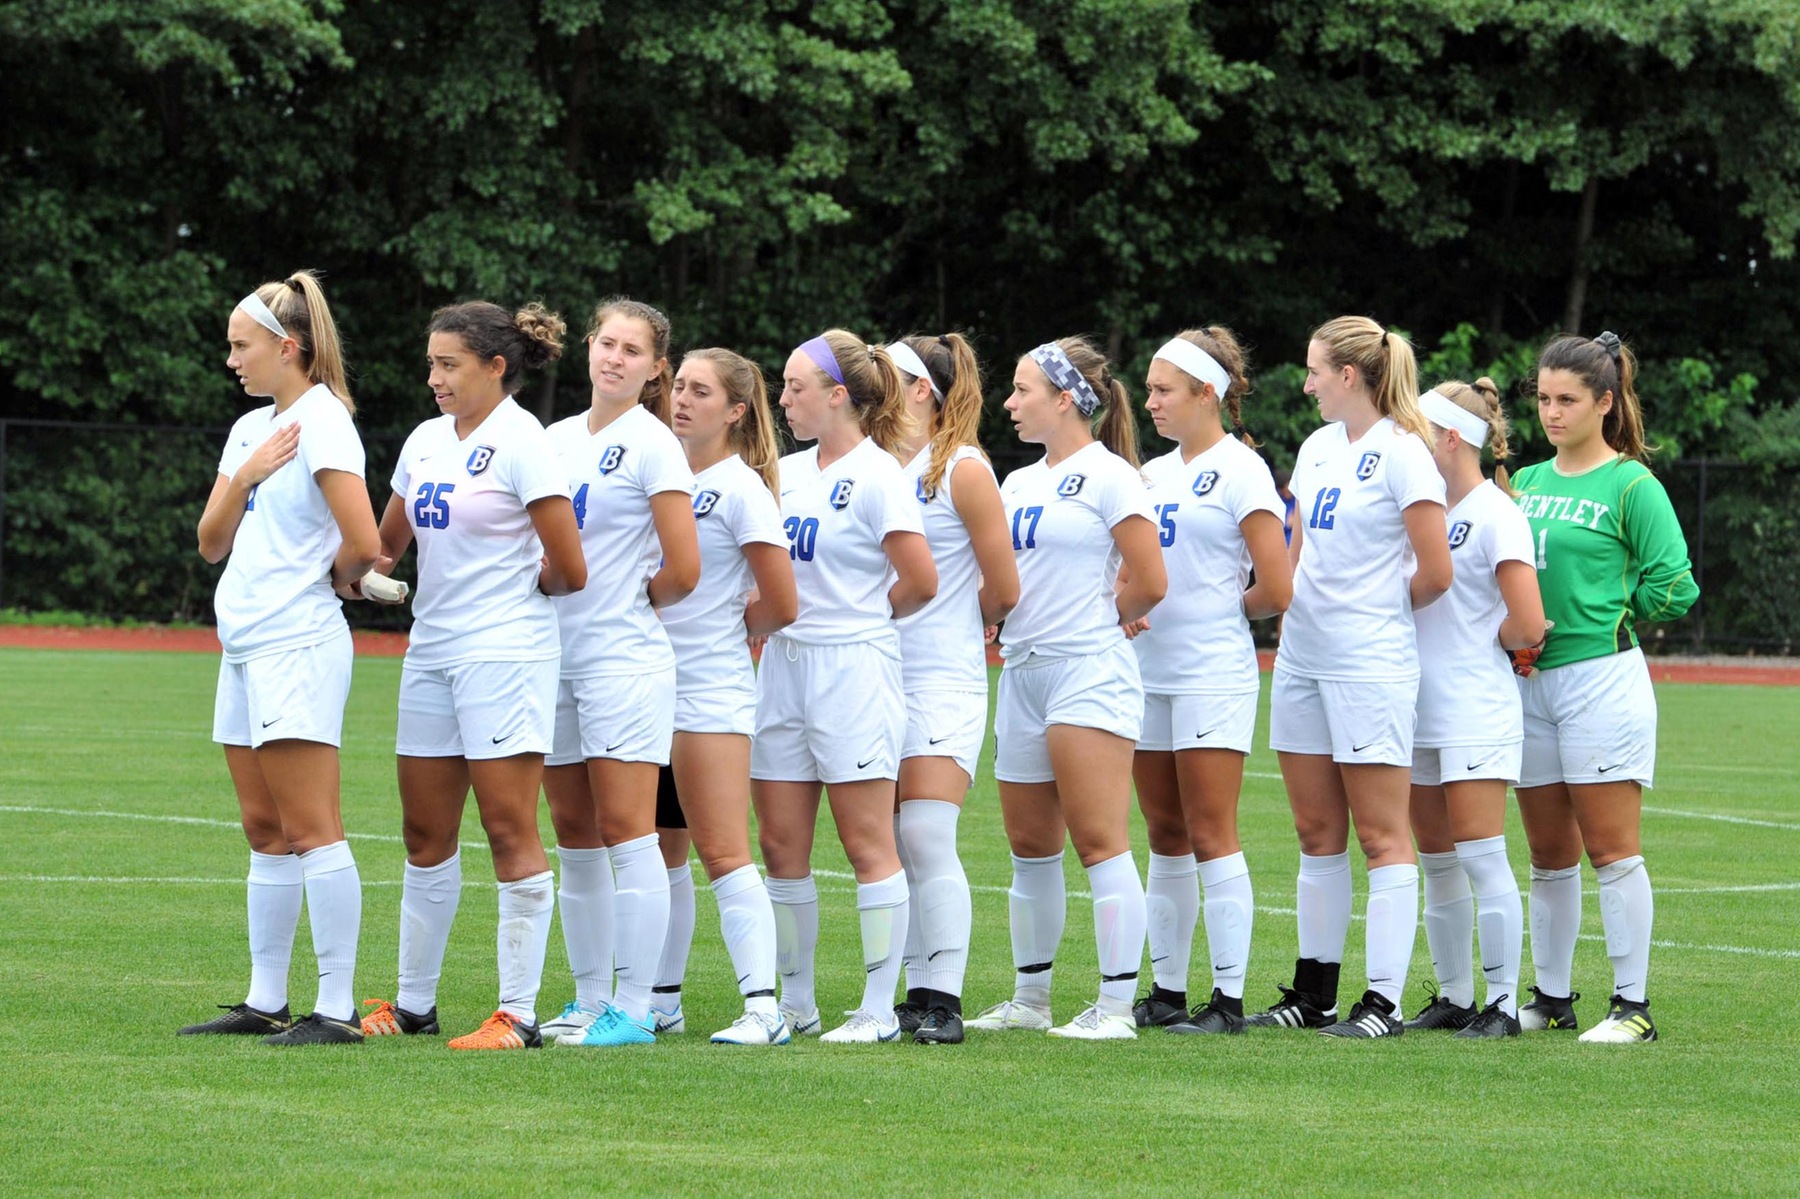 Bentley Ranked 18th in College Factual's 2019 Best Colleges for Division II Women's Soccer ranking.